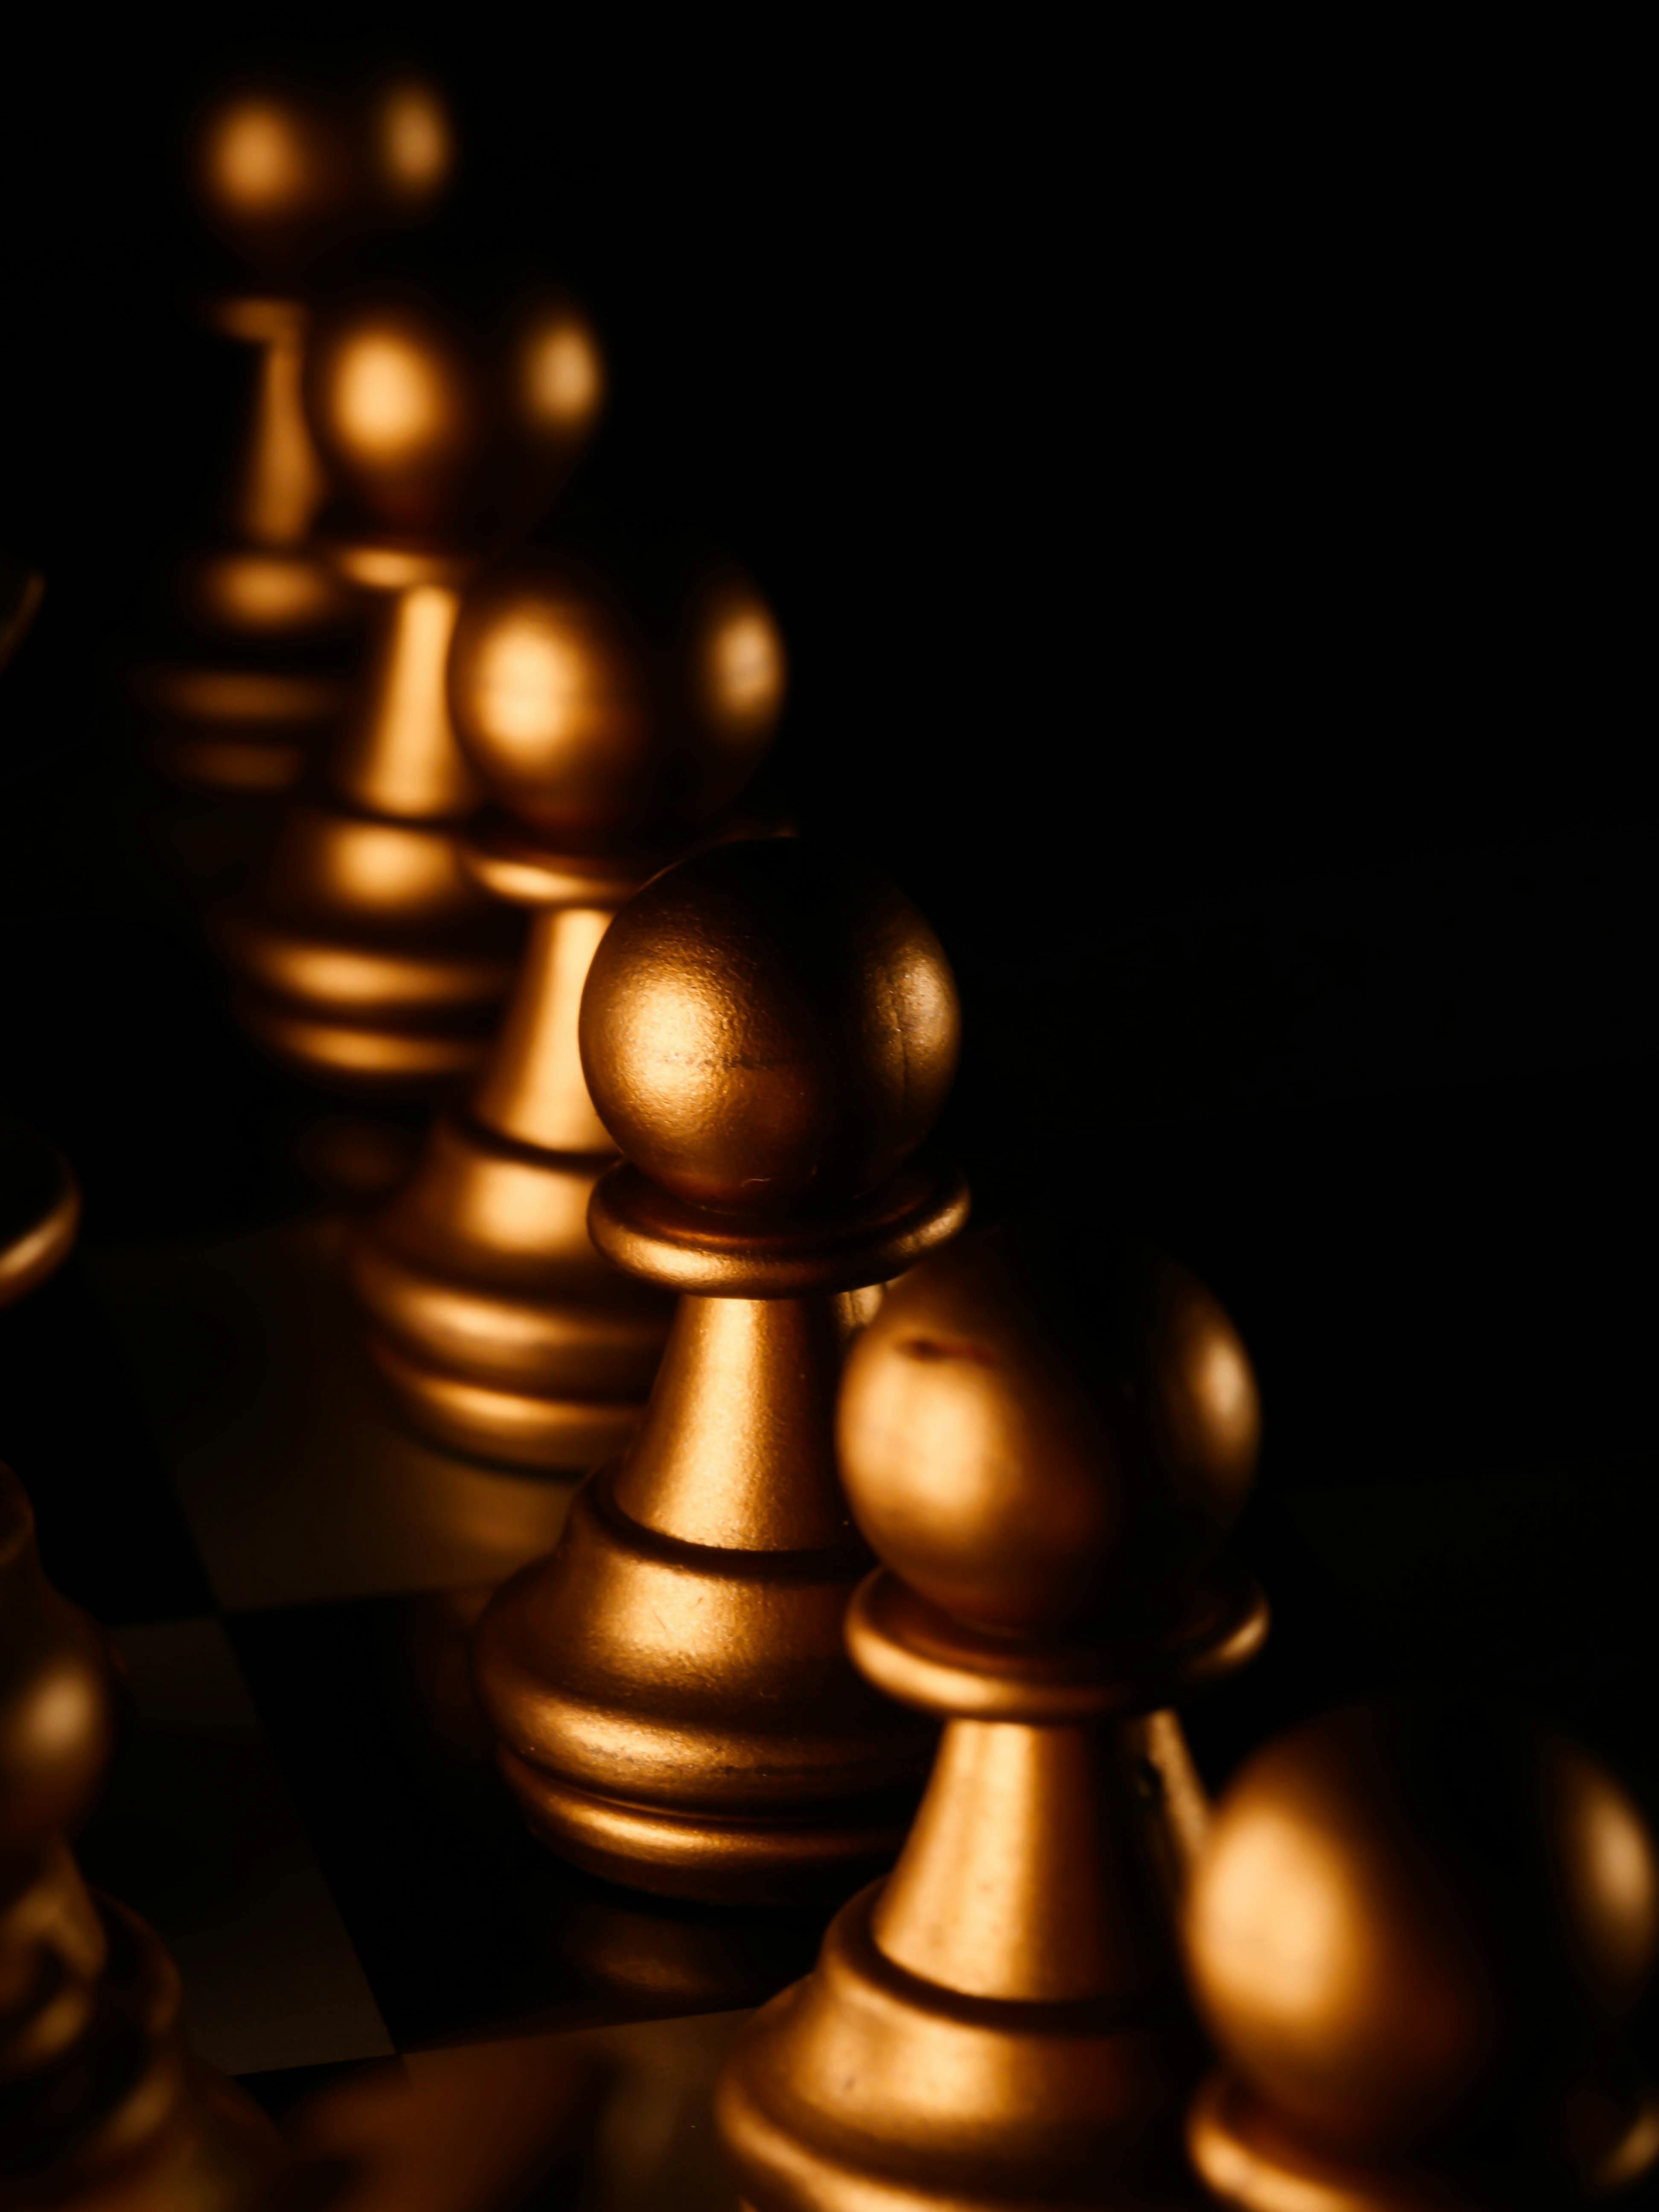 Gold Chess Pieces on Black Surface · Free Stock Photo